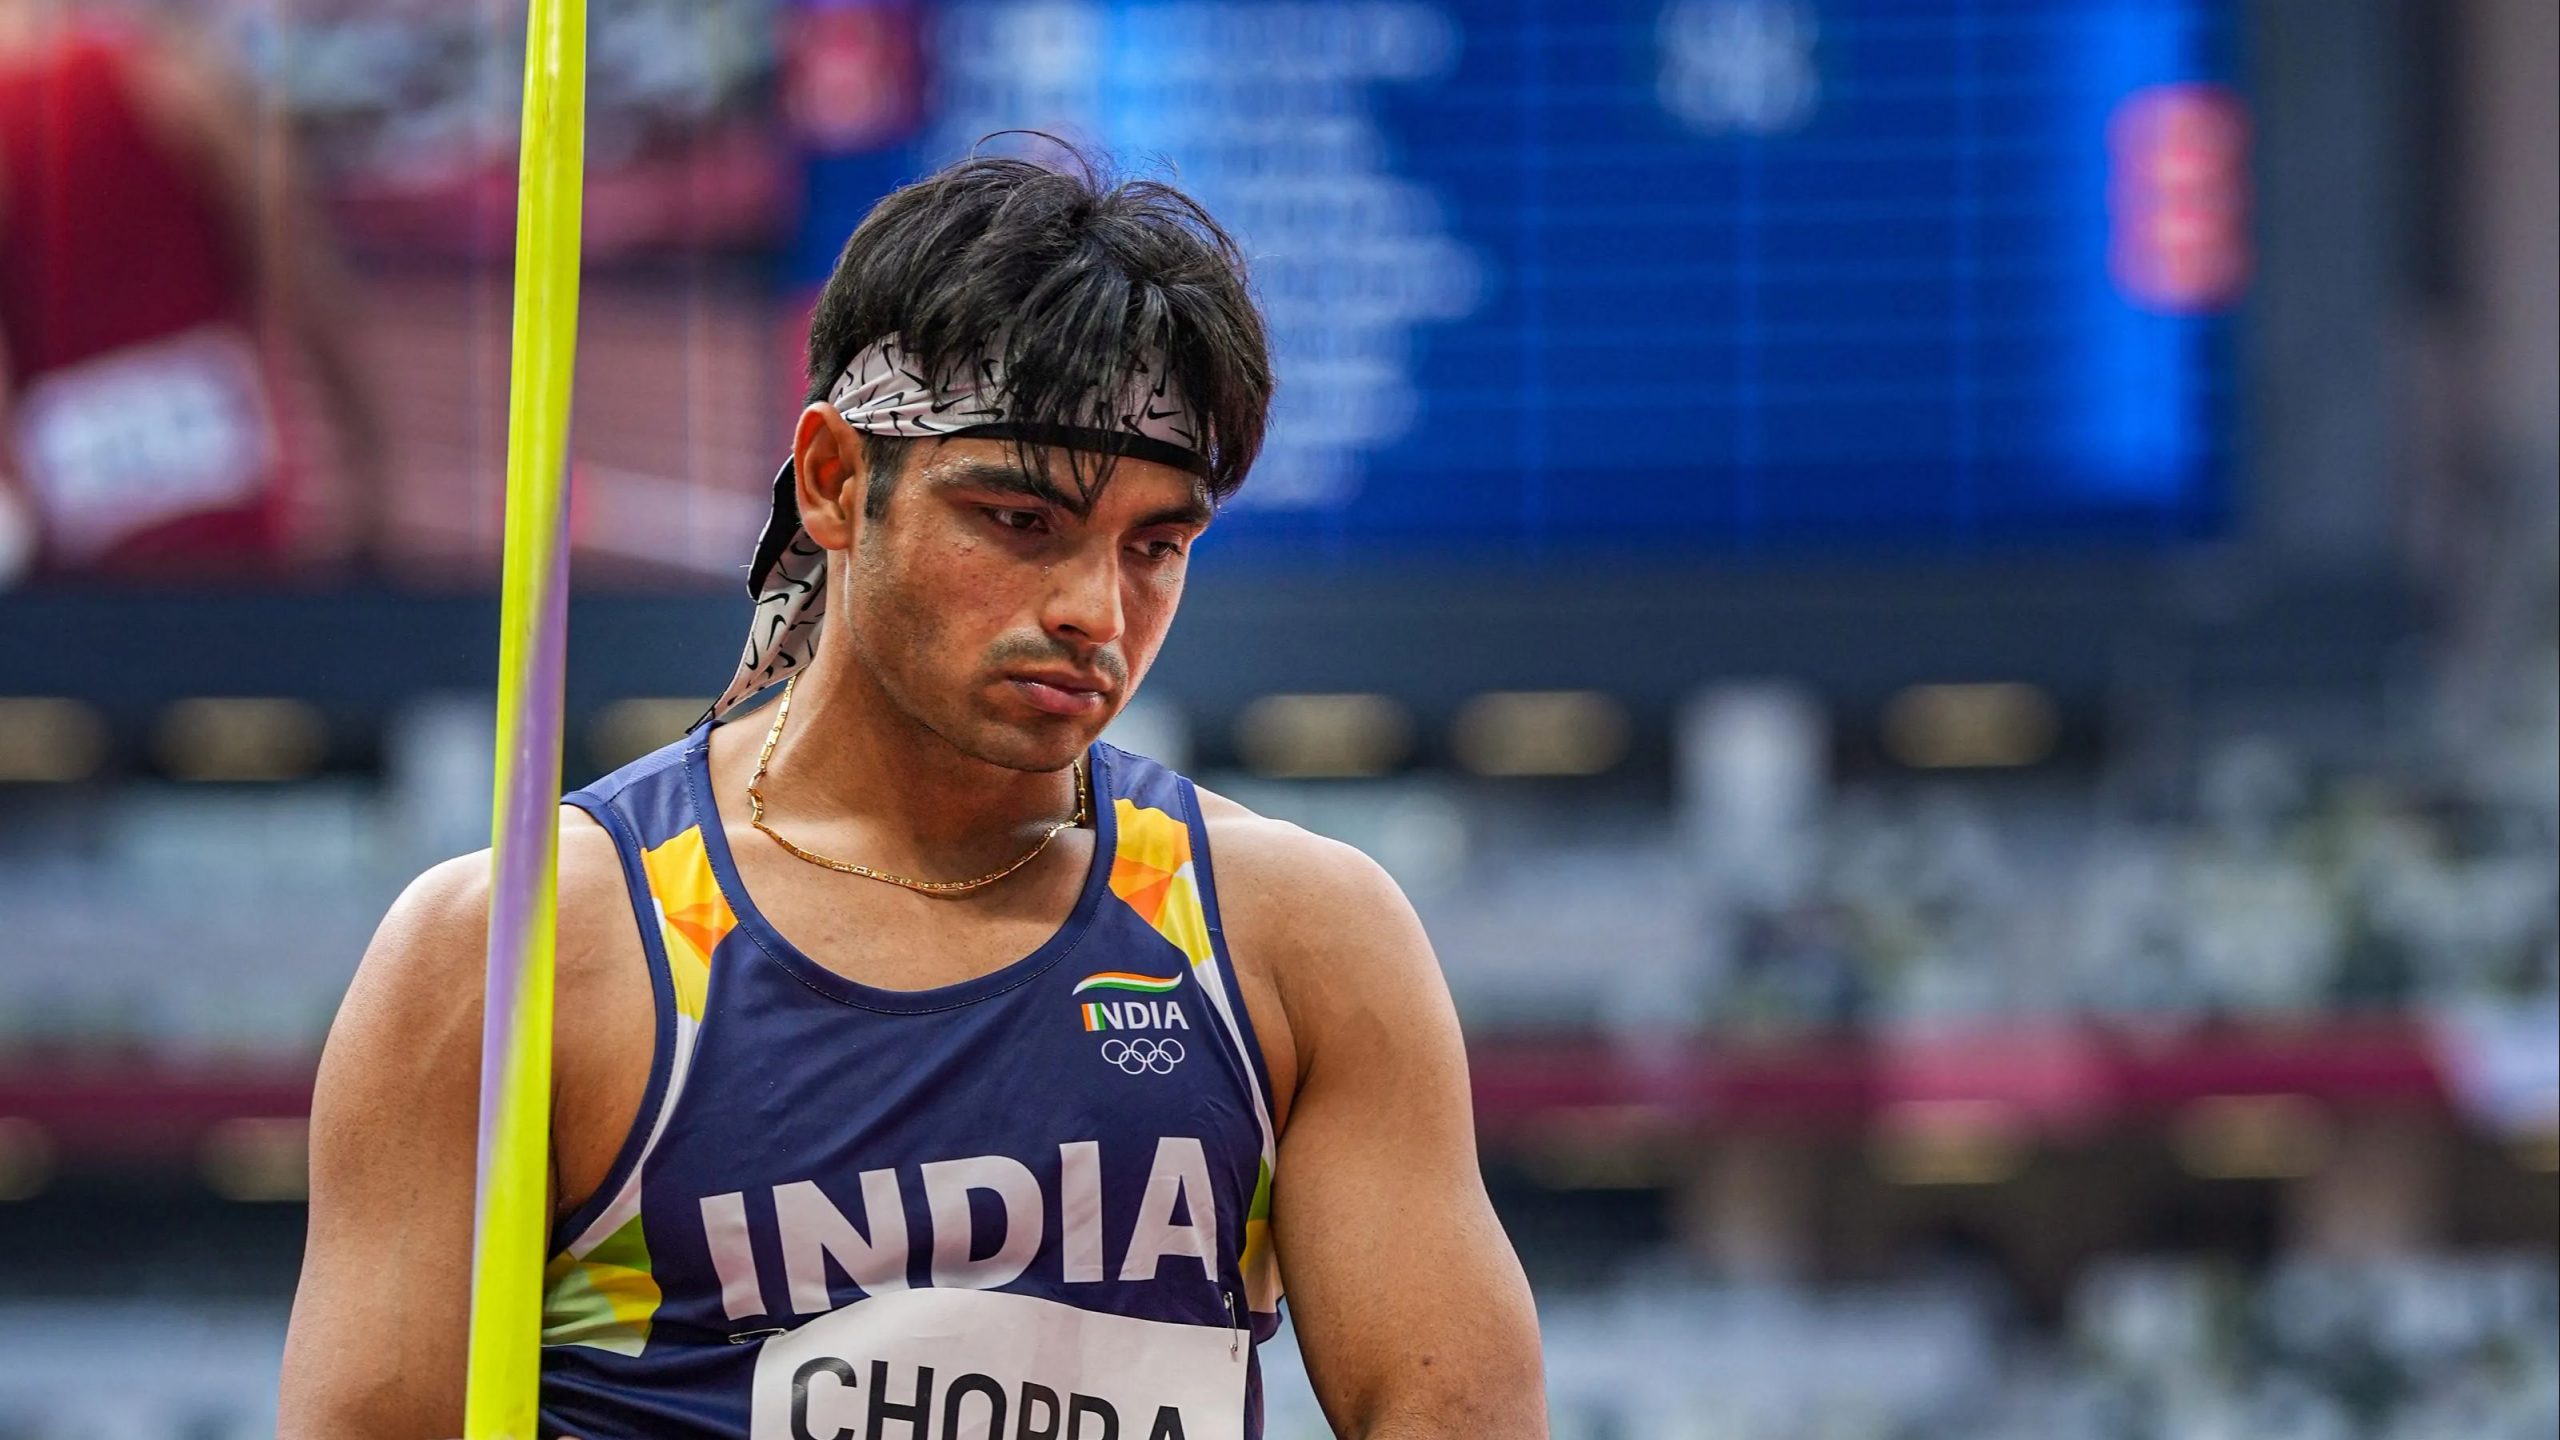 Neeraj Chopras gold and Indias rocky road to an Olympic medal in athletics